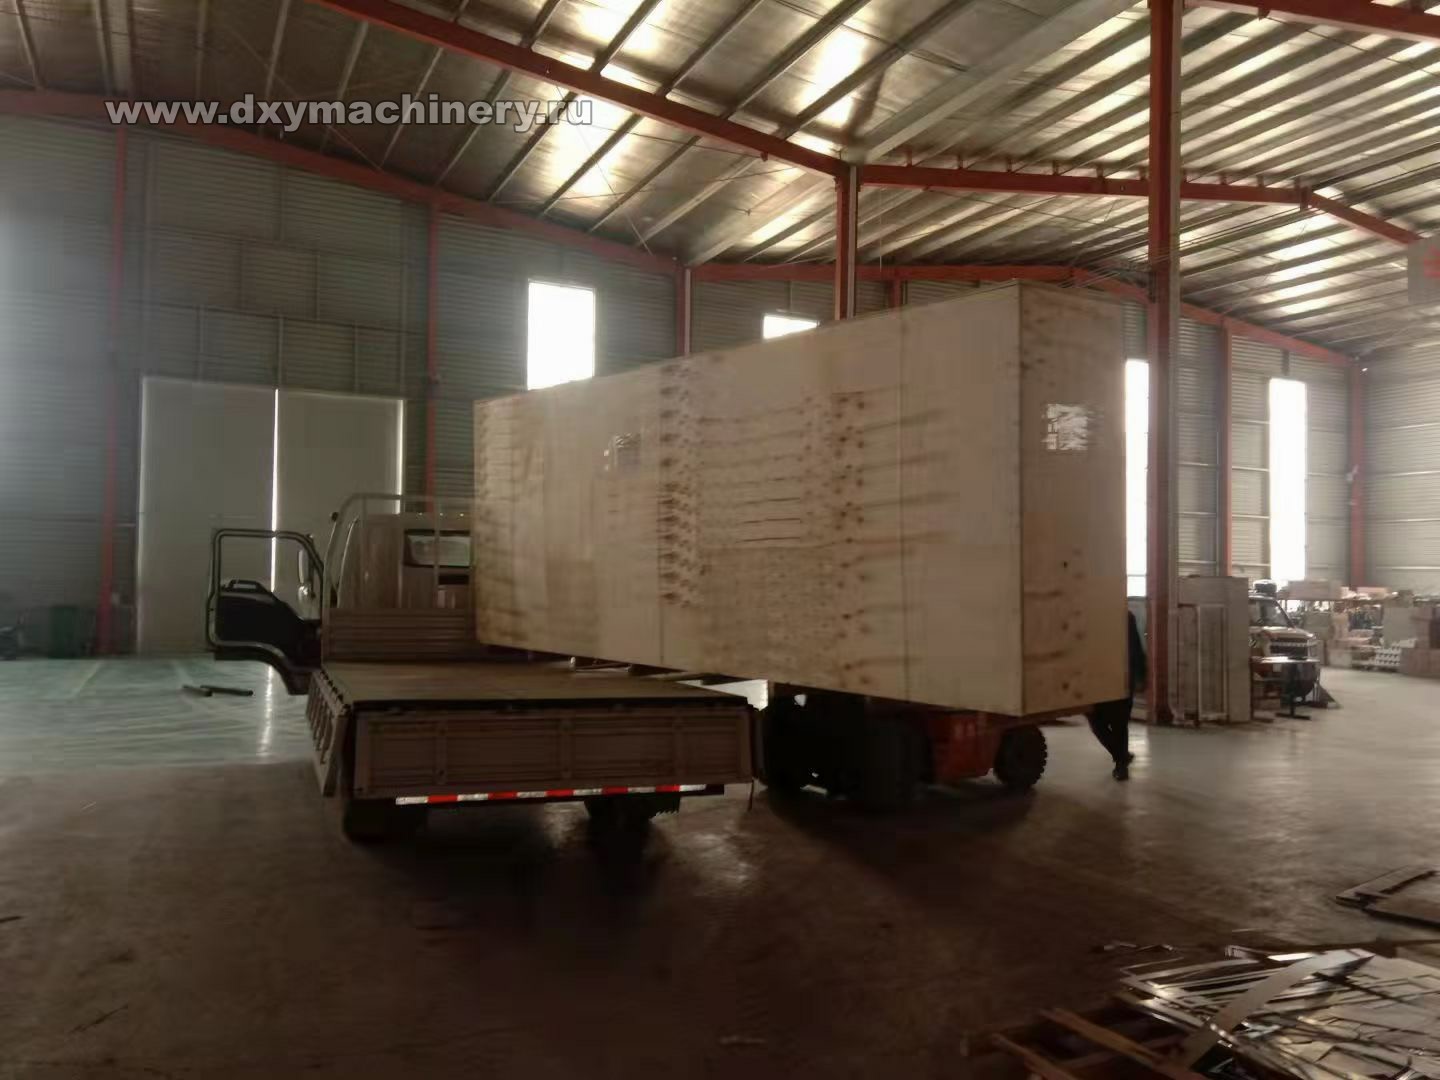 Delivery microwave equipment from China to Spain.